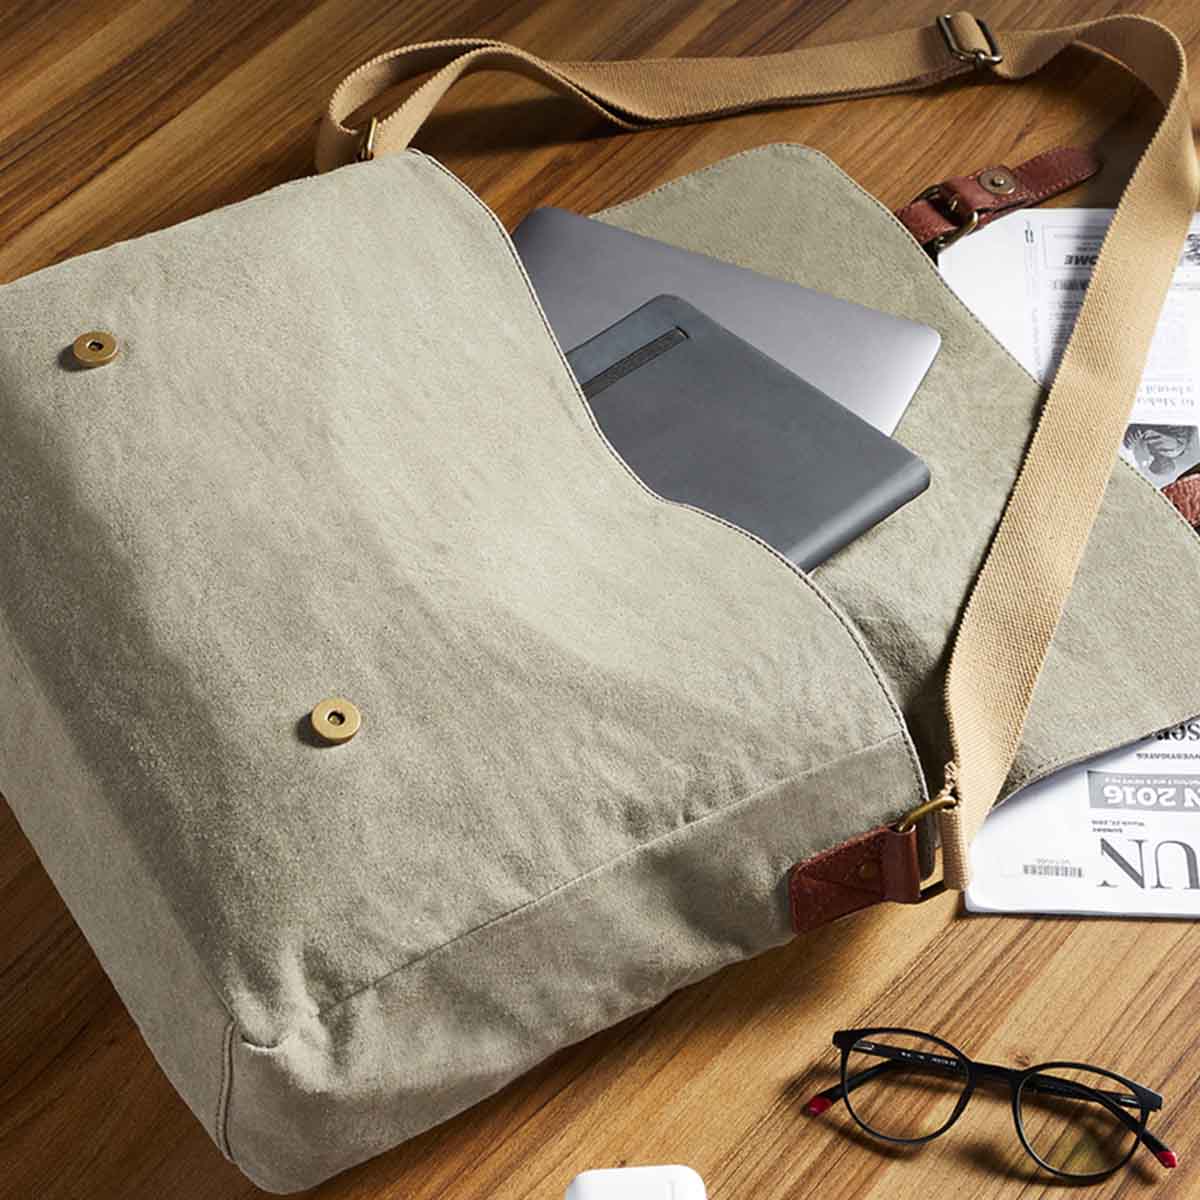 Mona-B Bag Mona B Canvas large Messenger Bag with inside laptop compartment for Offices, Schools and Colleges for Men and Women (Moss) - MC-1000 C